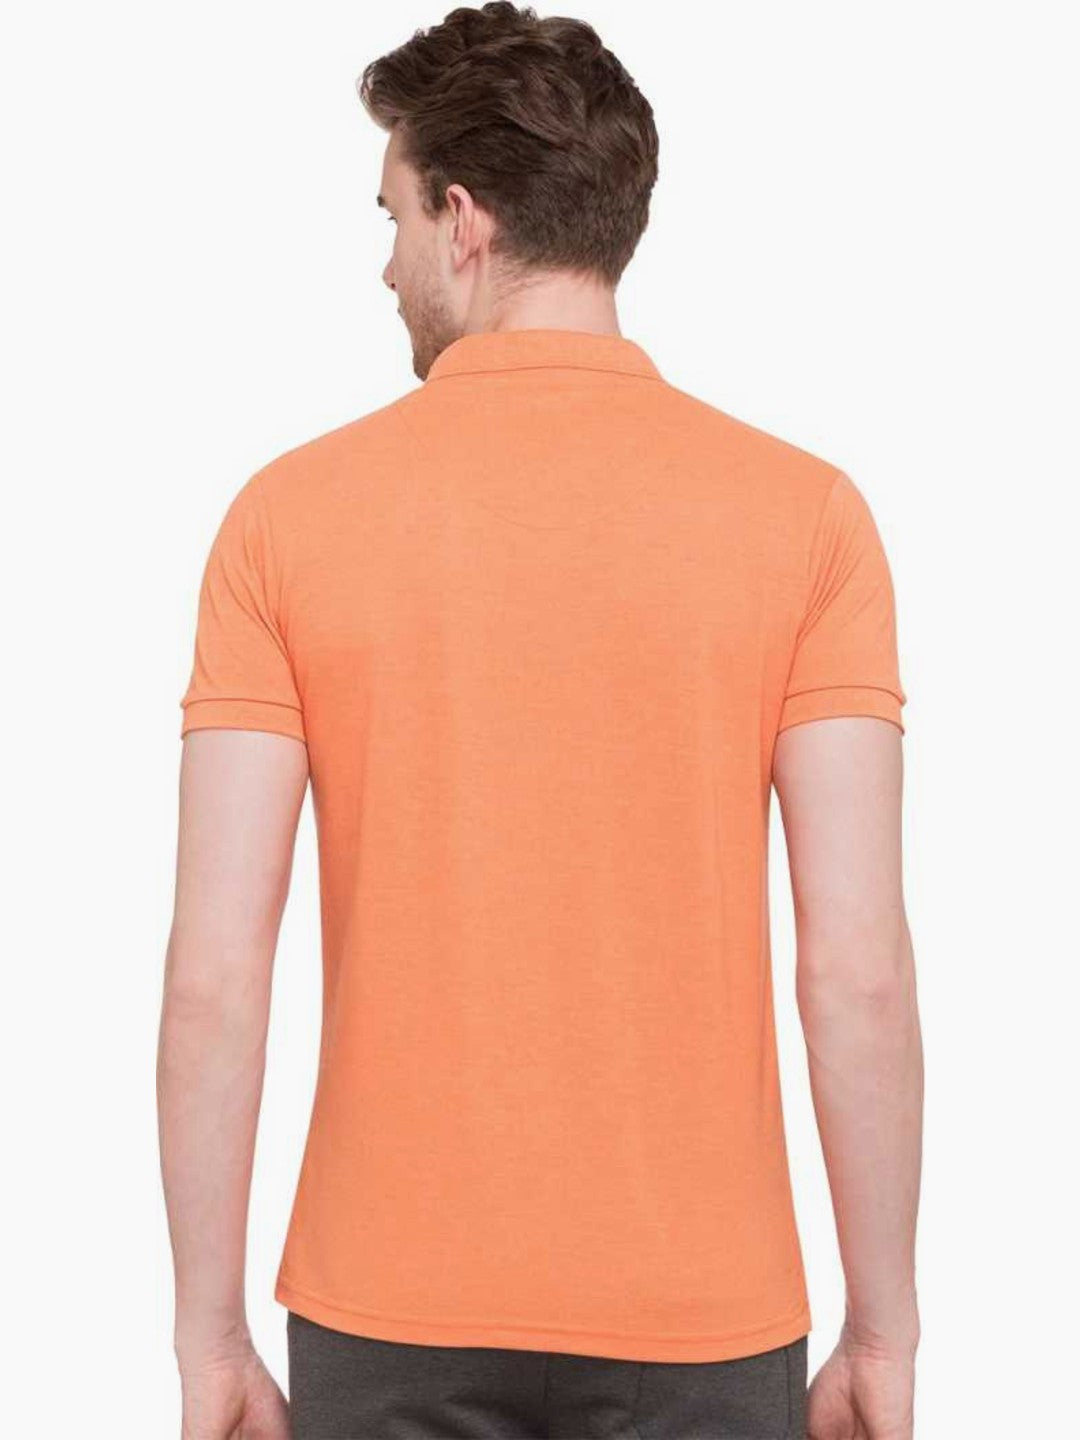 polo t shirt combo offer